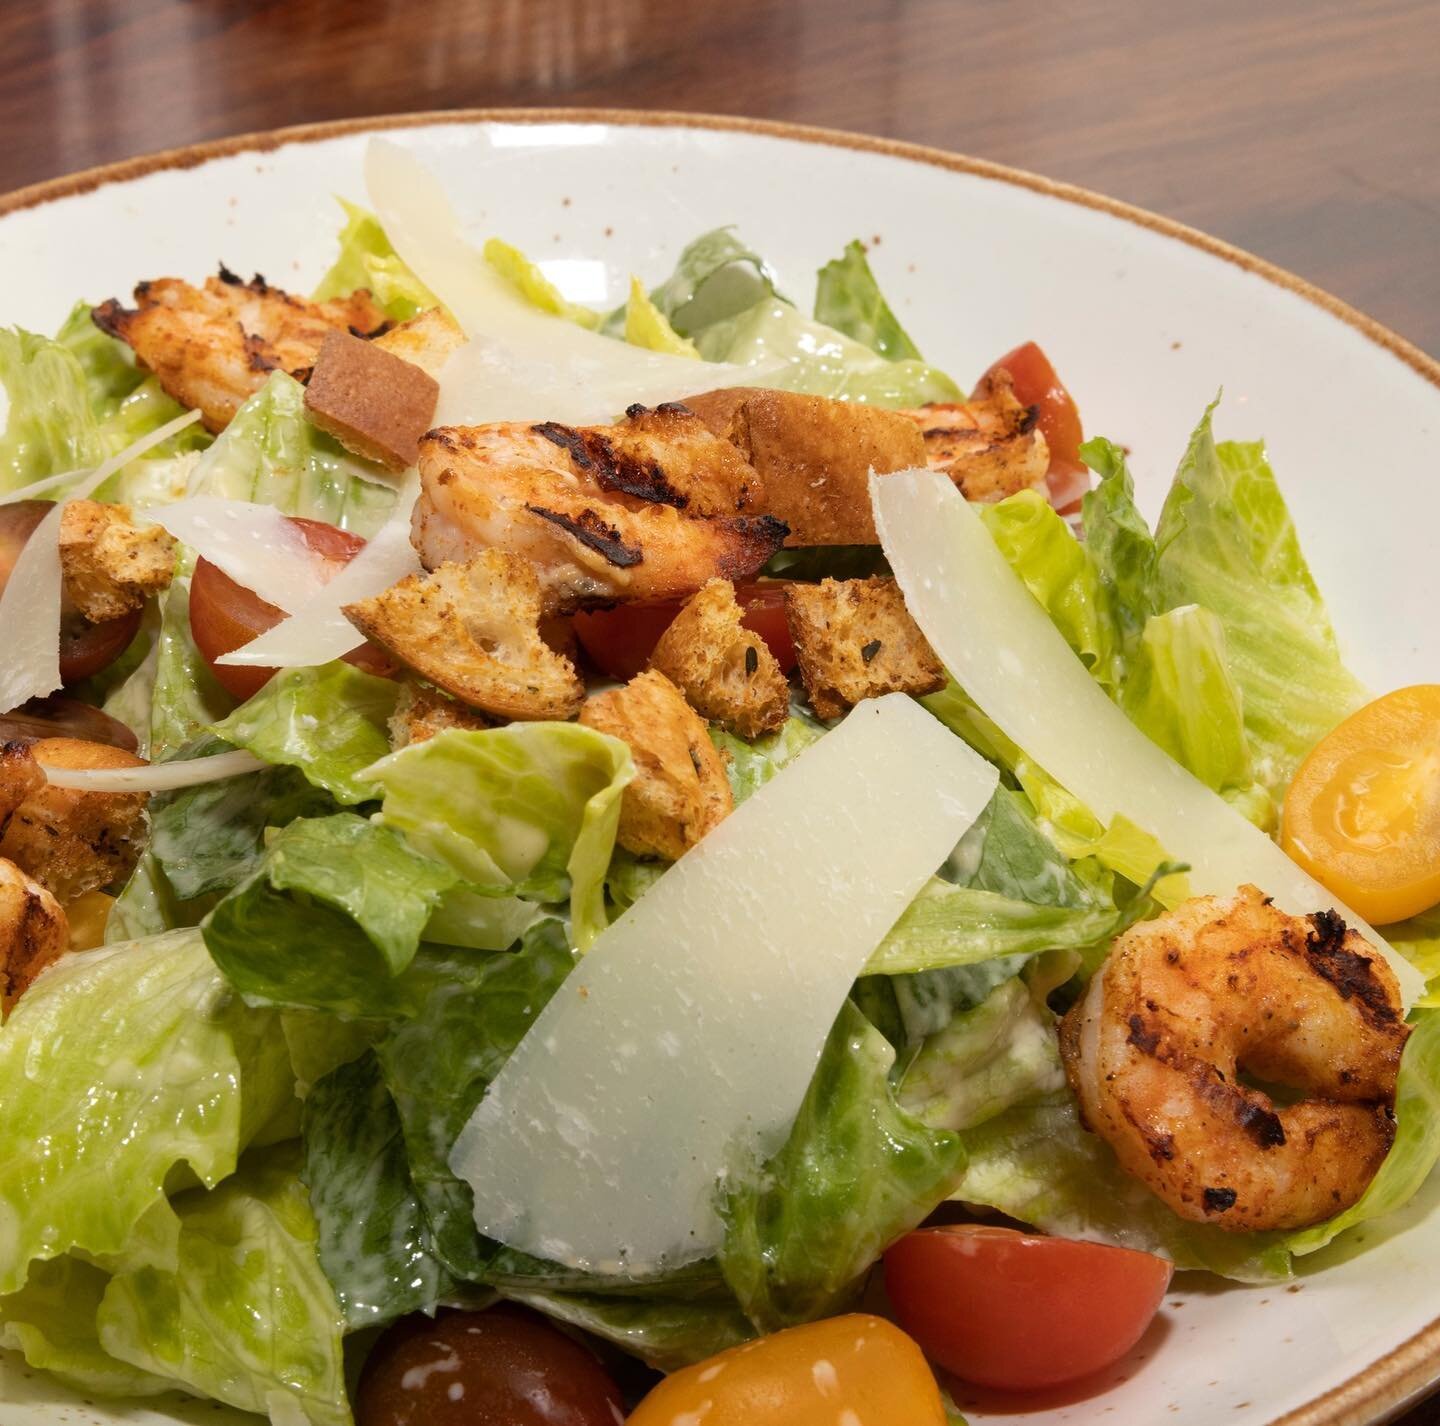 Have you tried our caesar salad with prawns? Absolutely delicious.